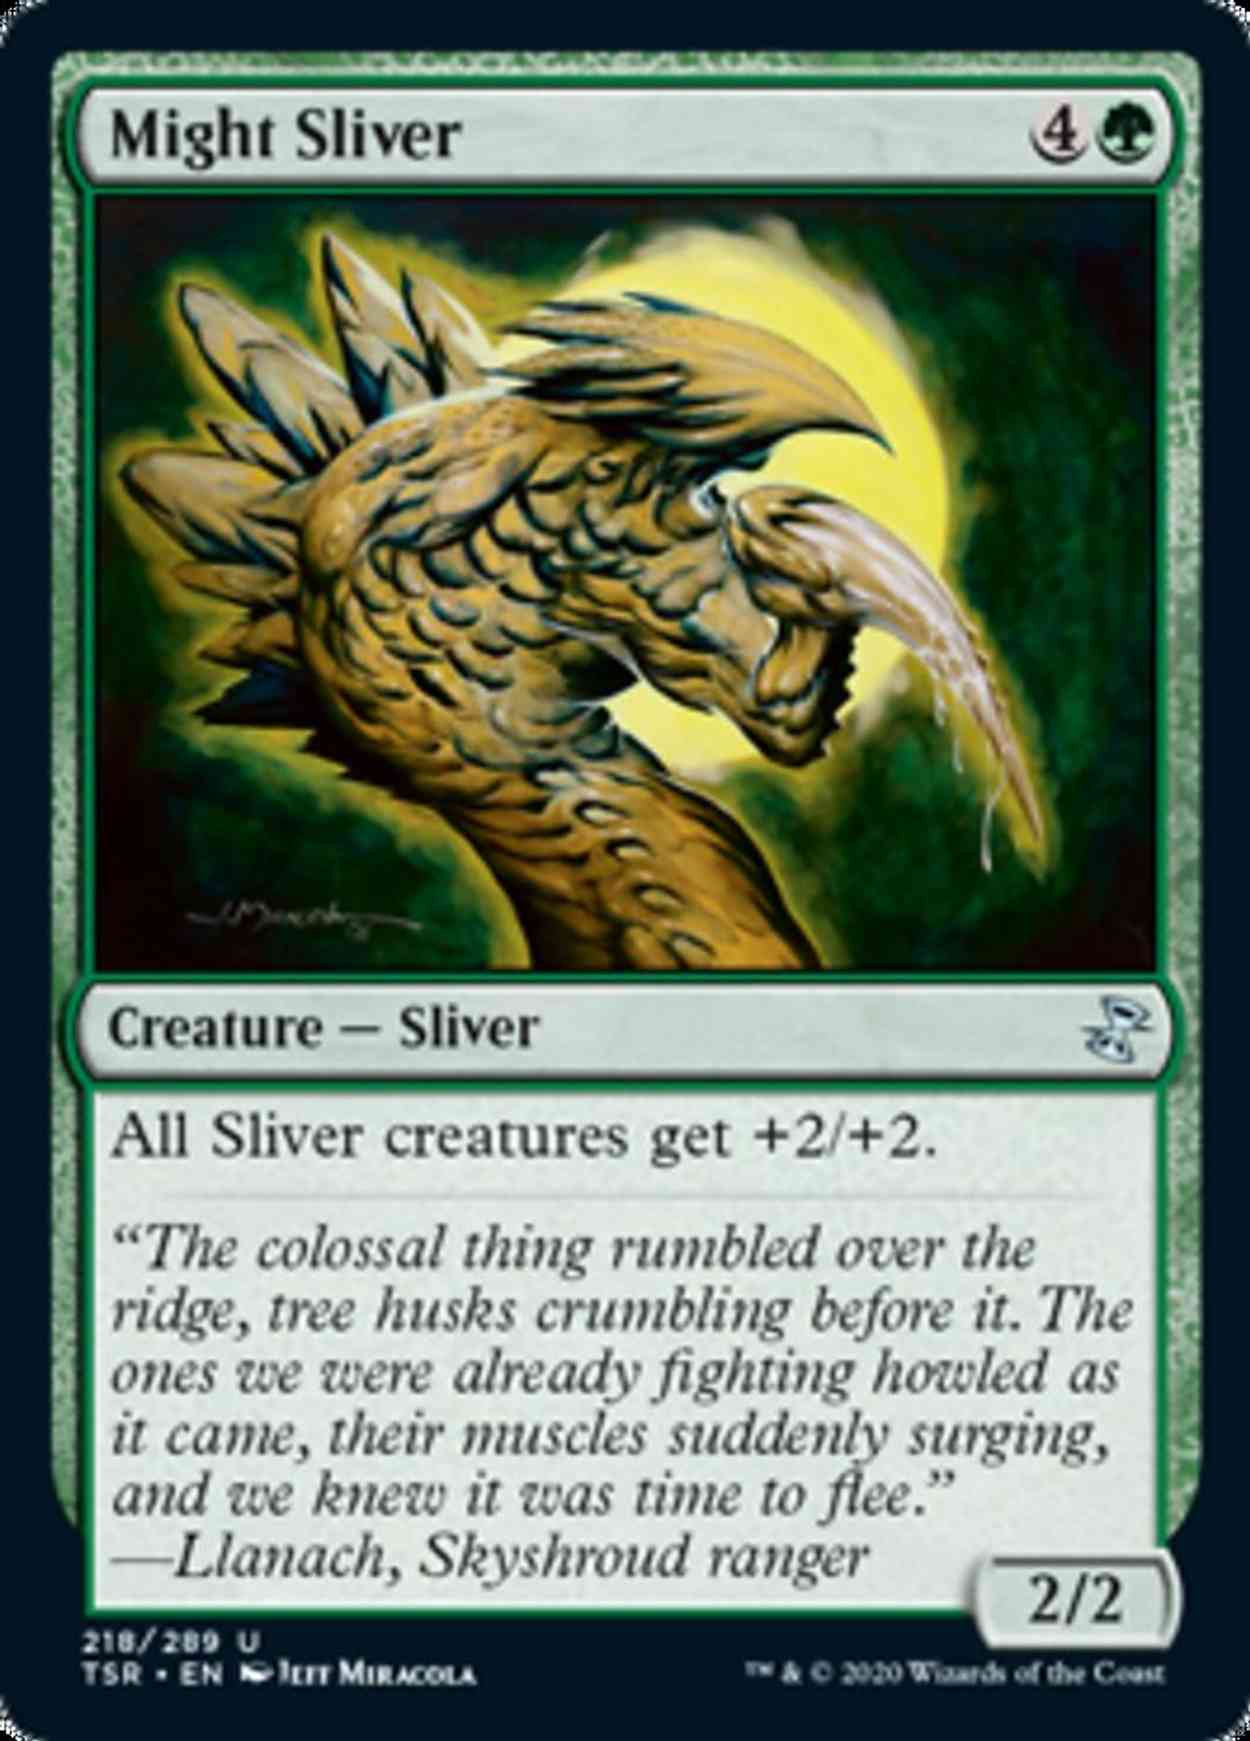 Might Sliver magic card front